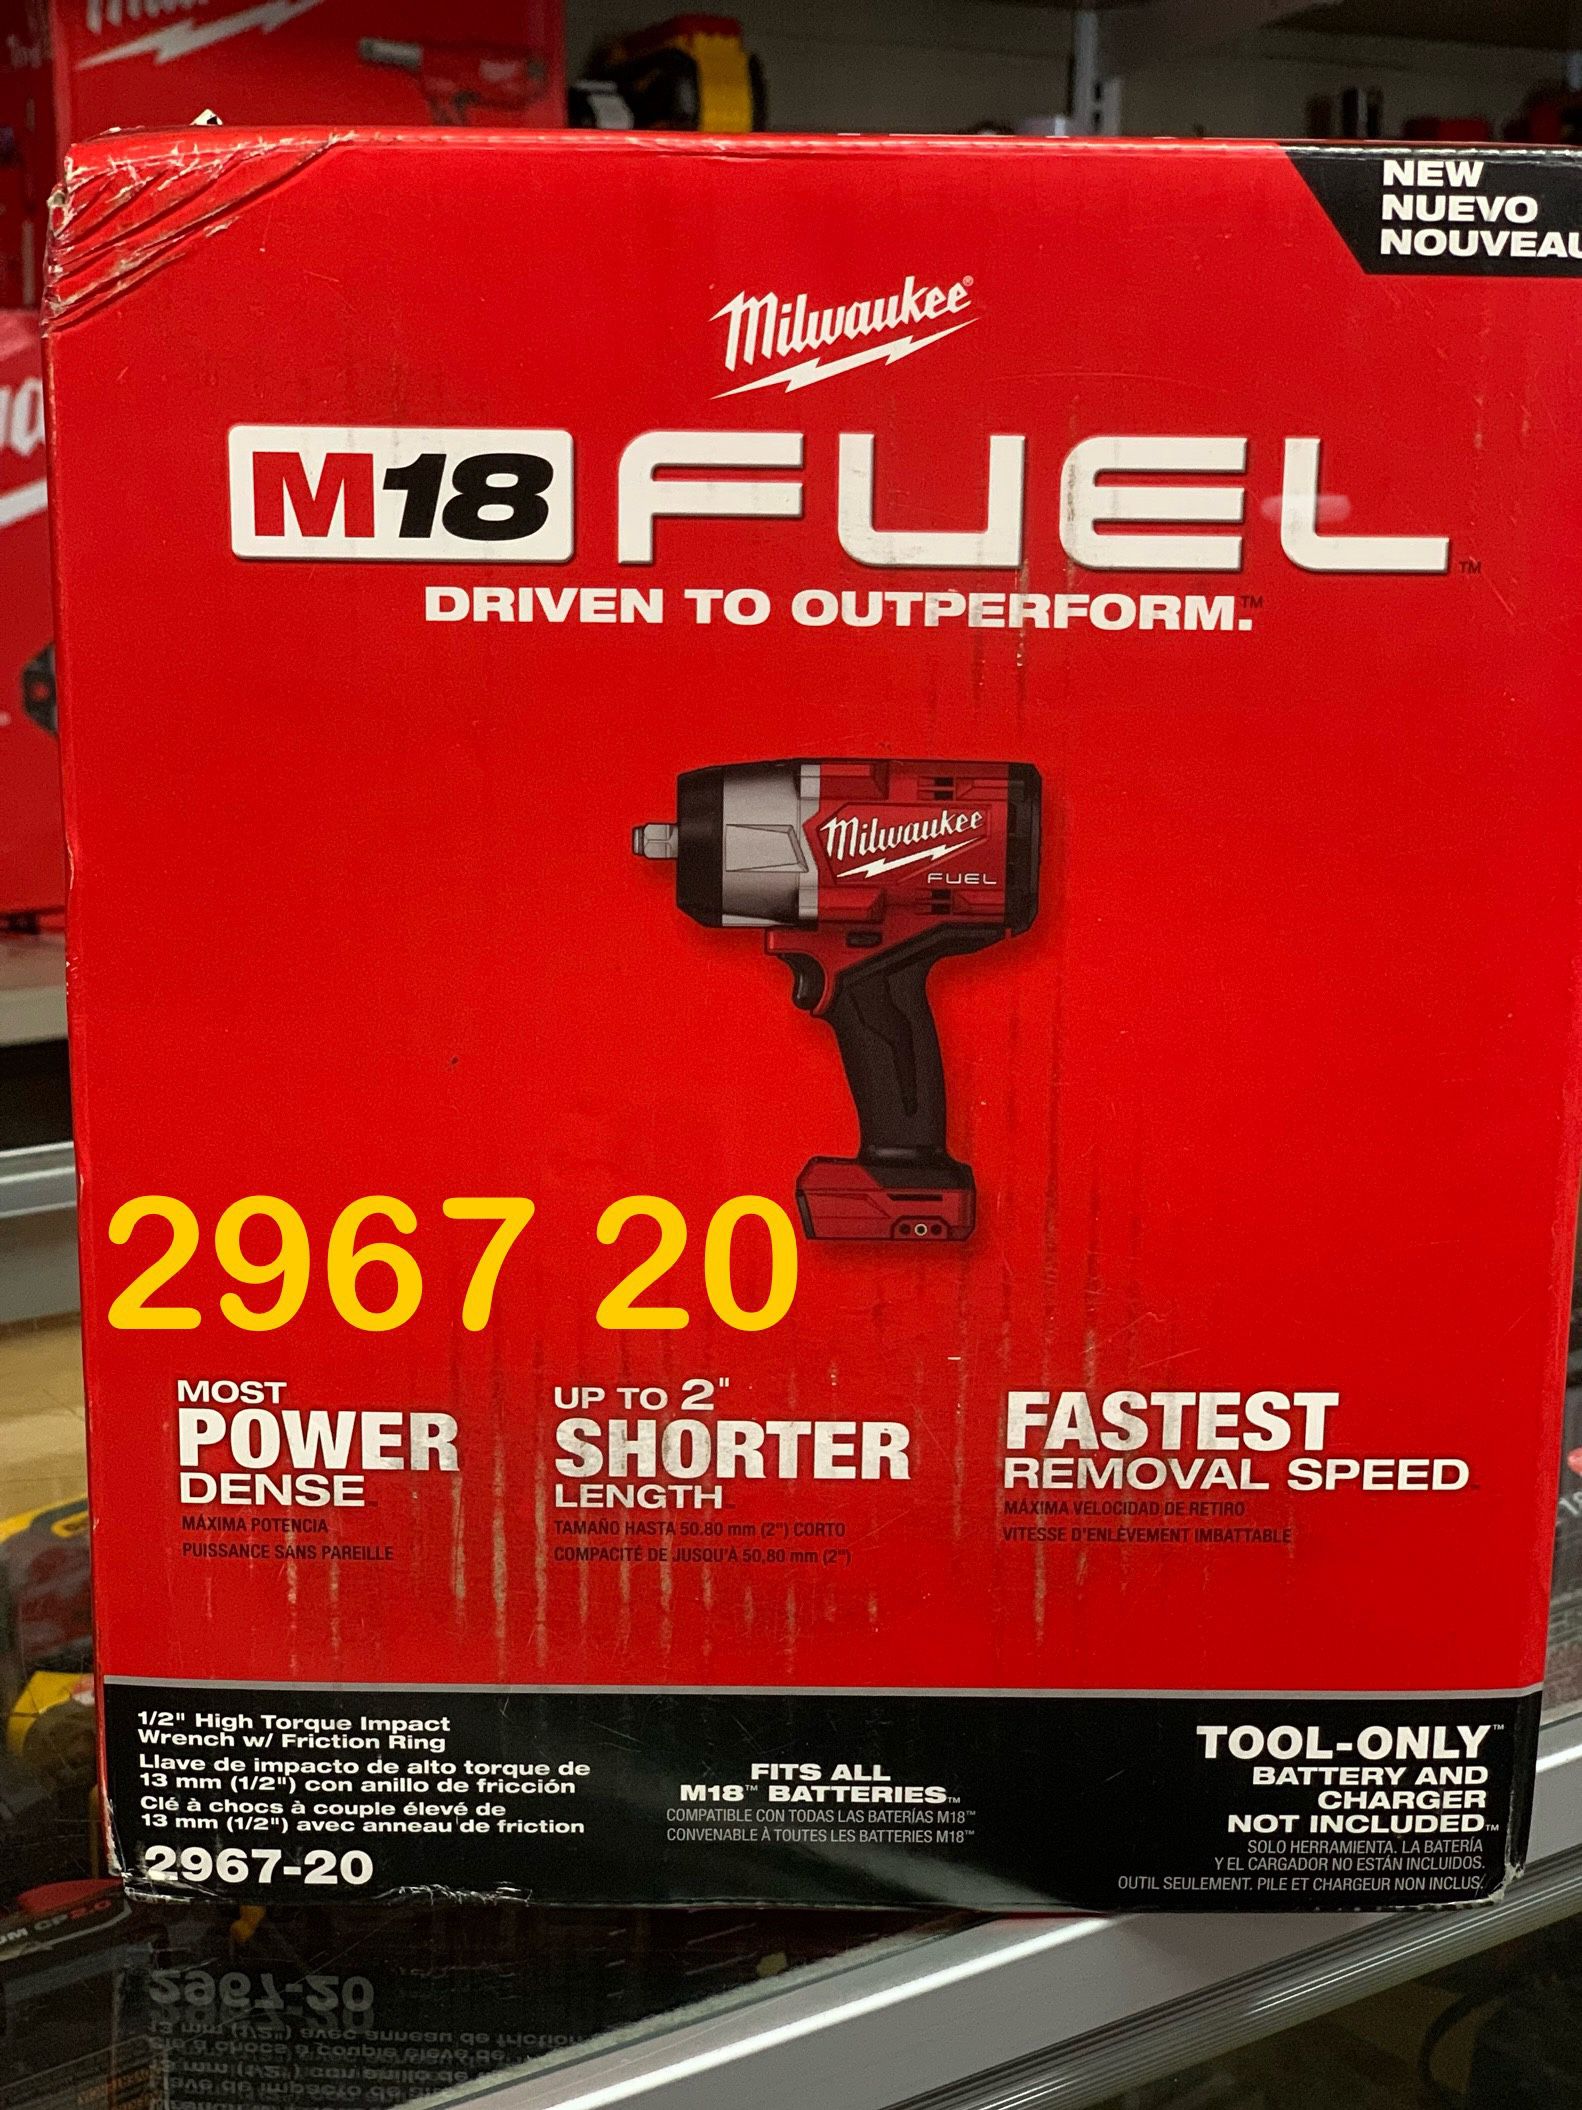 Milwaukee New 1/2” High Torque Impact Wrench M18 Fuel - New Generation 